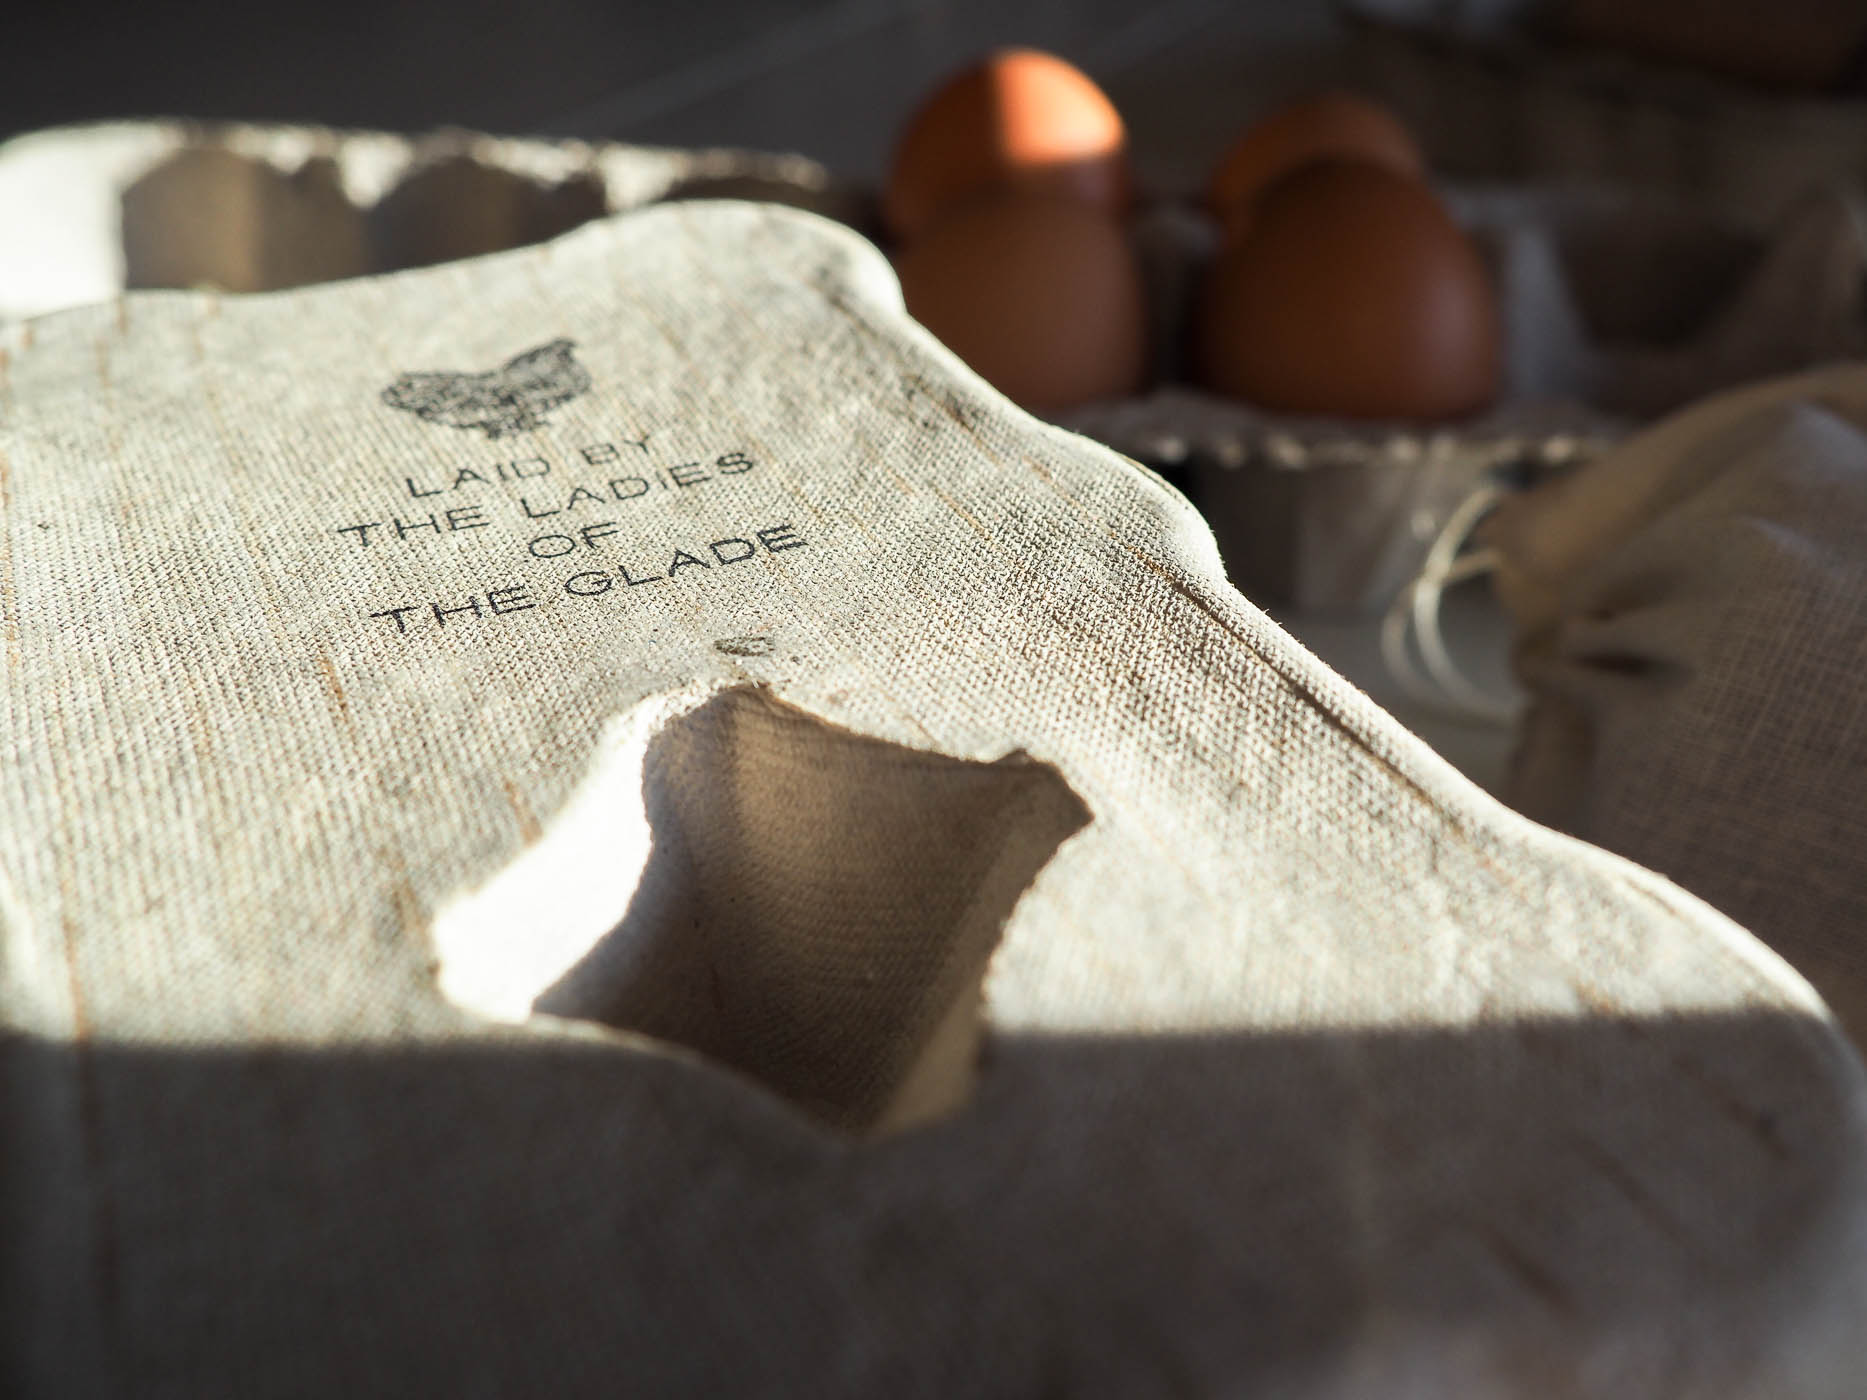 The Woodland Wife - Chicken Egg Box Stamp, Fraser & Parsley